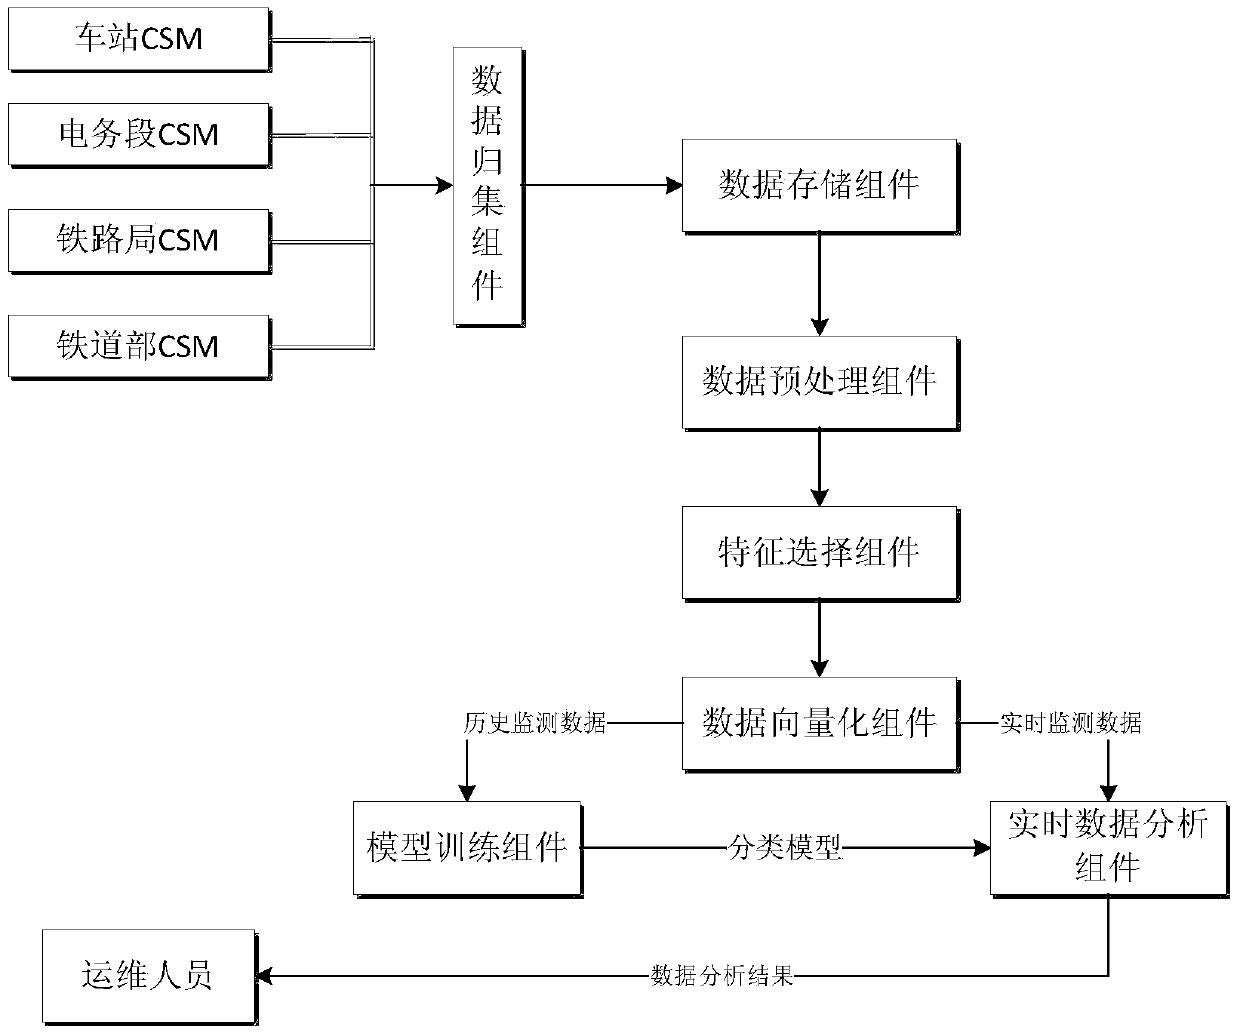 Method and system of fault diagnosis of rail transit based on SVM (Support Vector Machine)